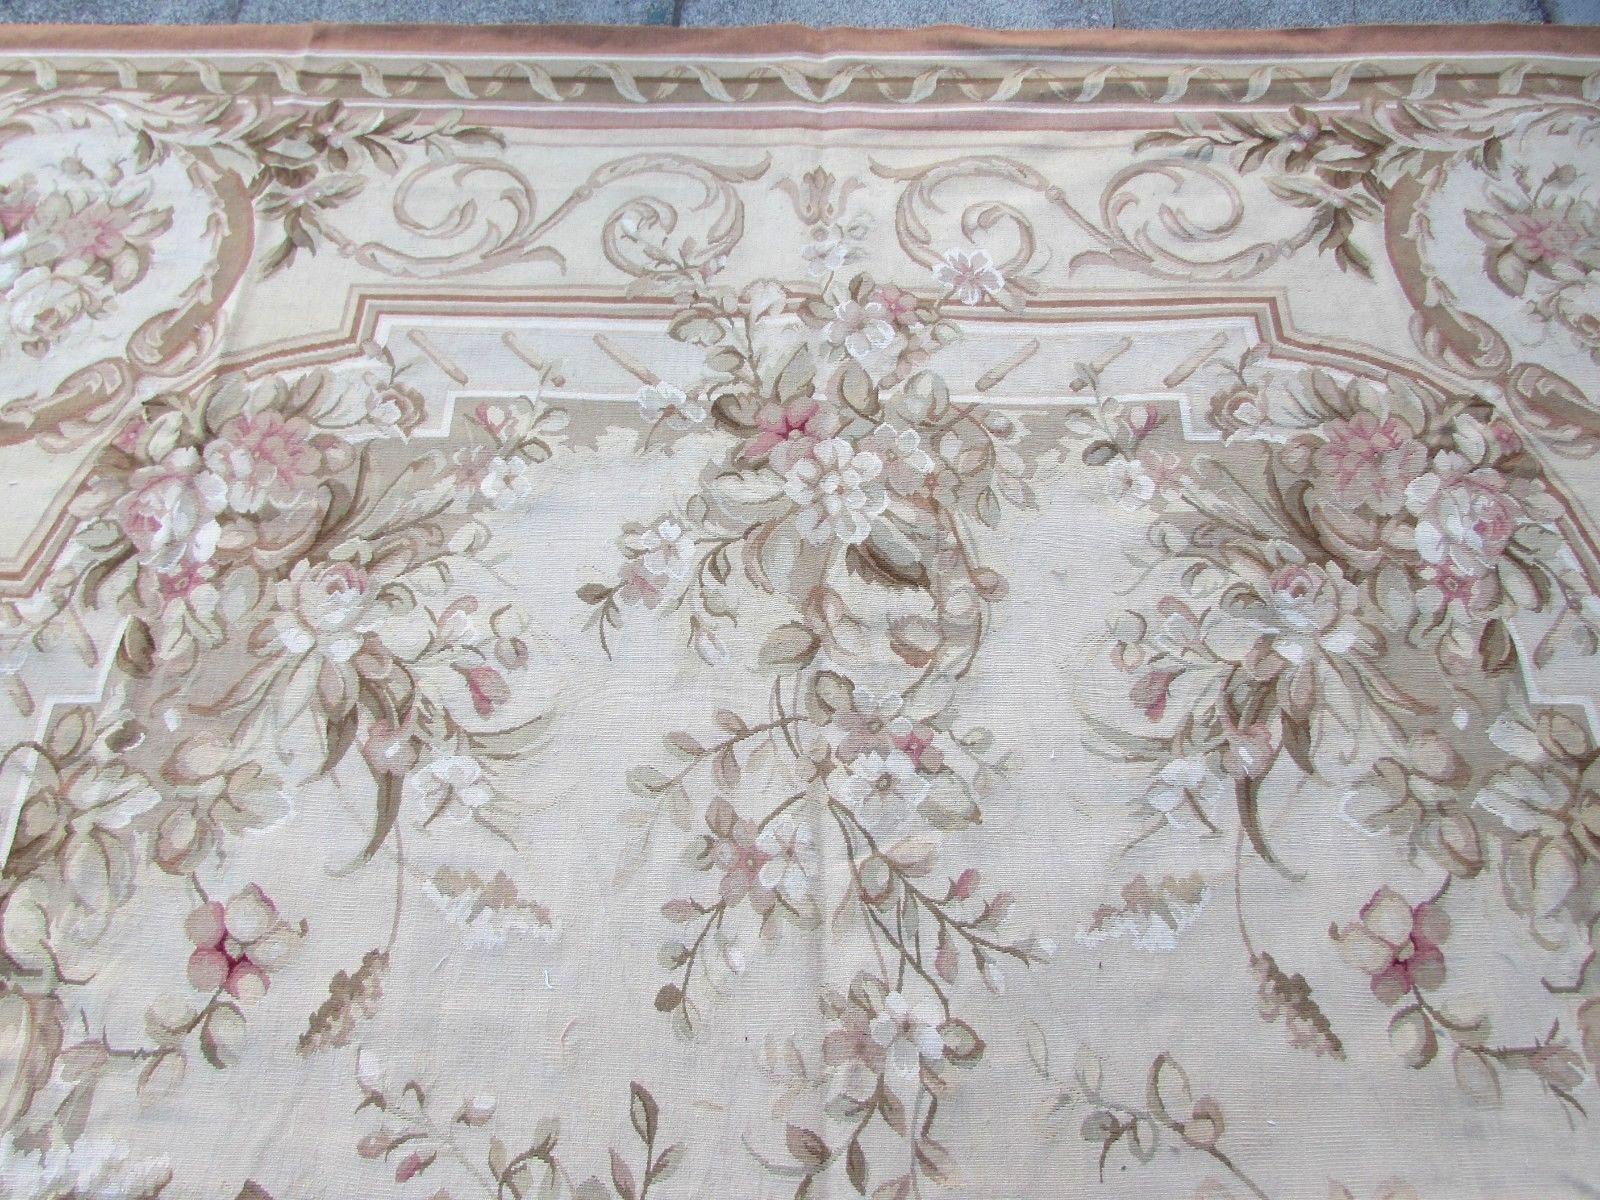 Handmade vintage French Aubusson rug in wool. This rug has been made in the end of 20th century, it is in original good condition.

- Condition: Original good,

- circa 1970s,

- Size: 9' x 12.5' (270cm x 372cm),

- Material: Wool,

-